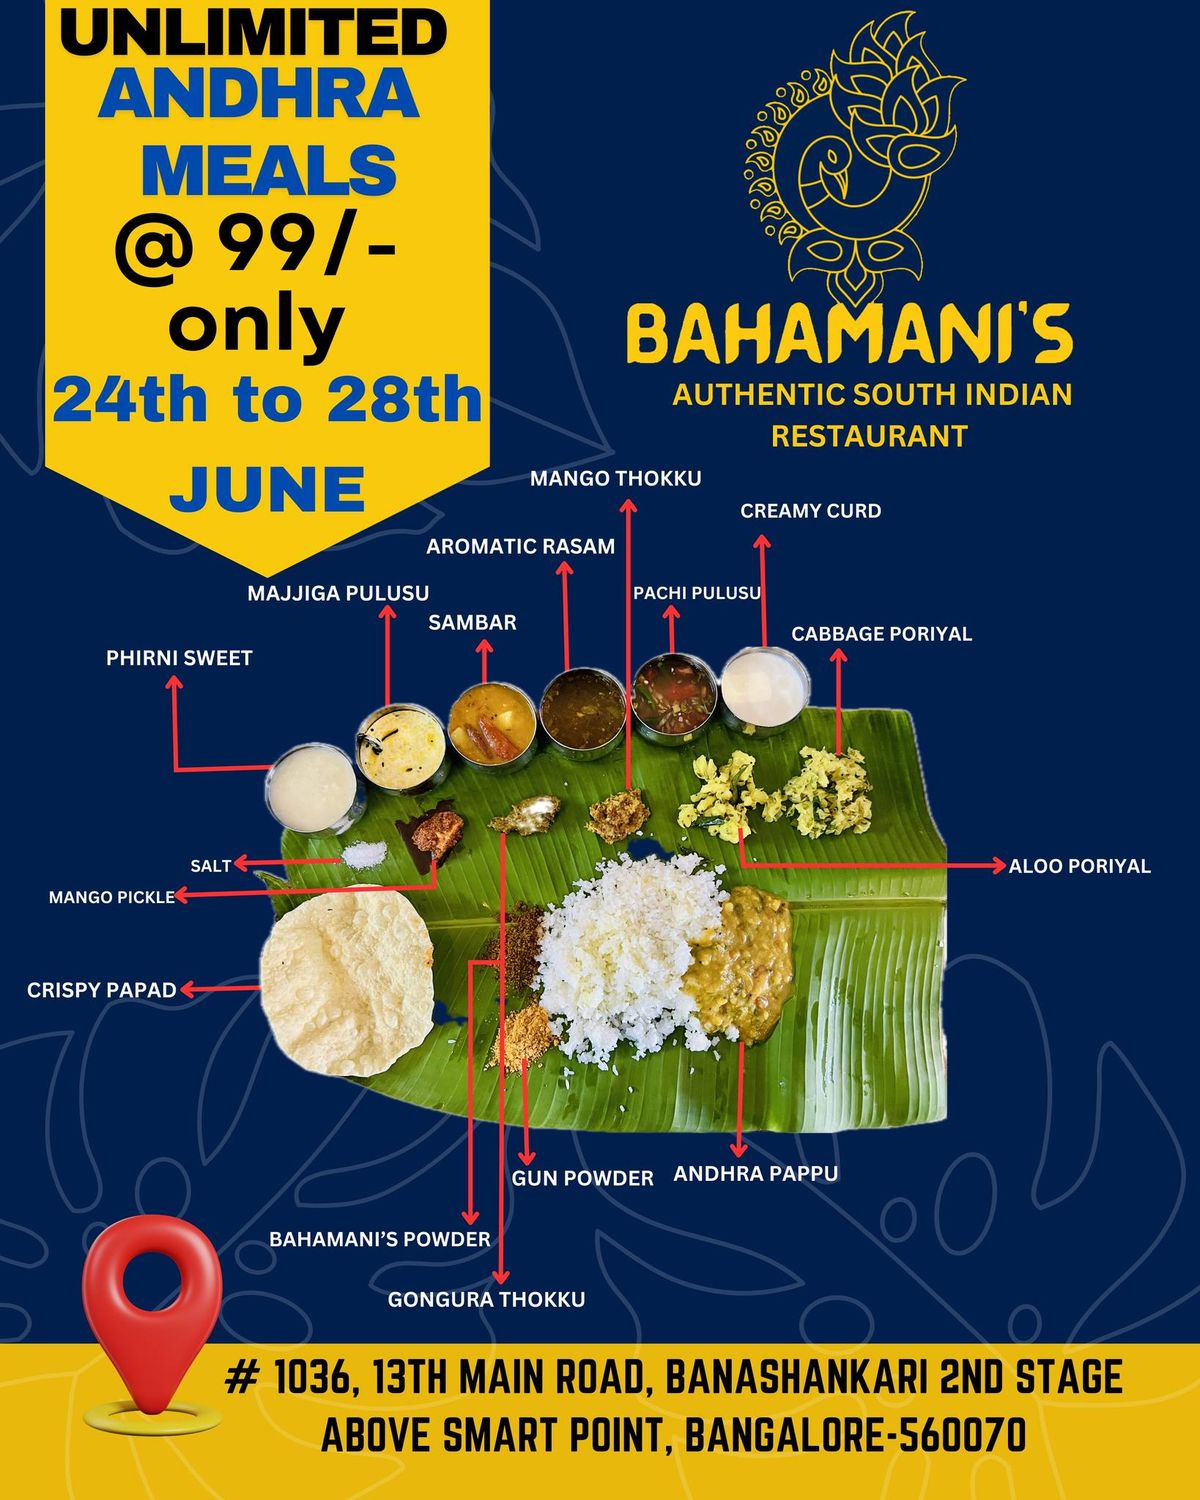 Bahamani's Andhra Meals Unlimited